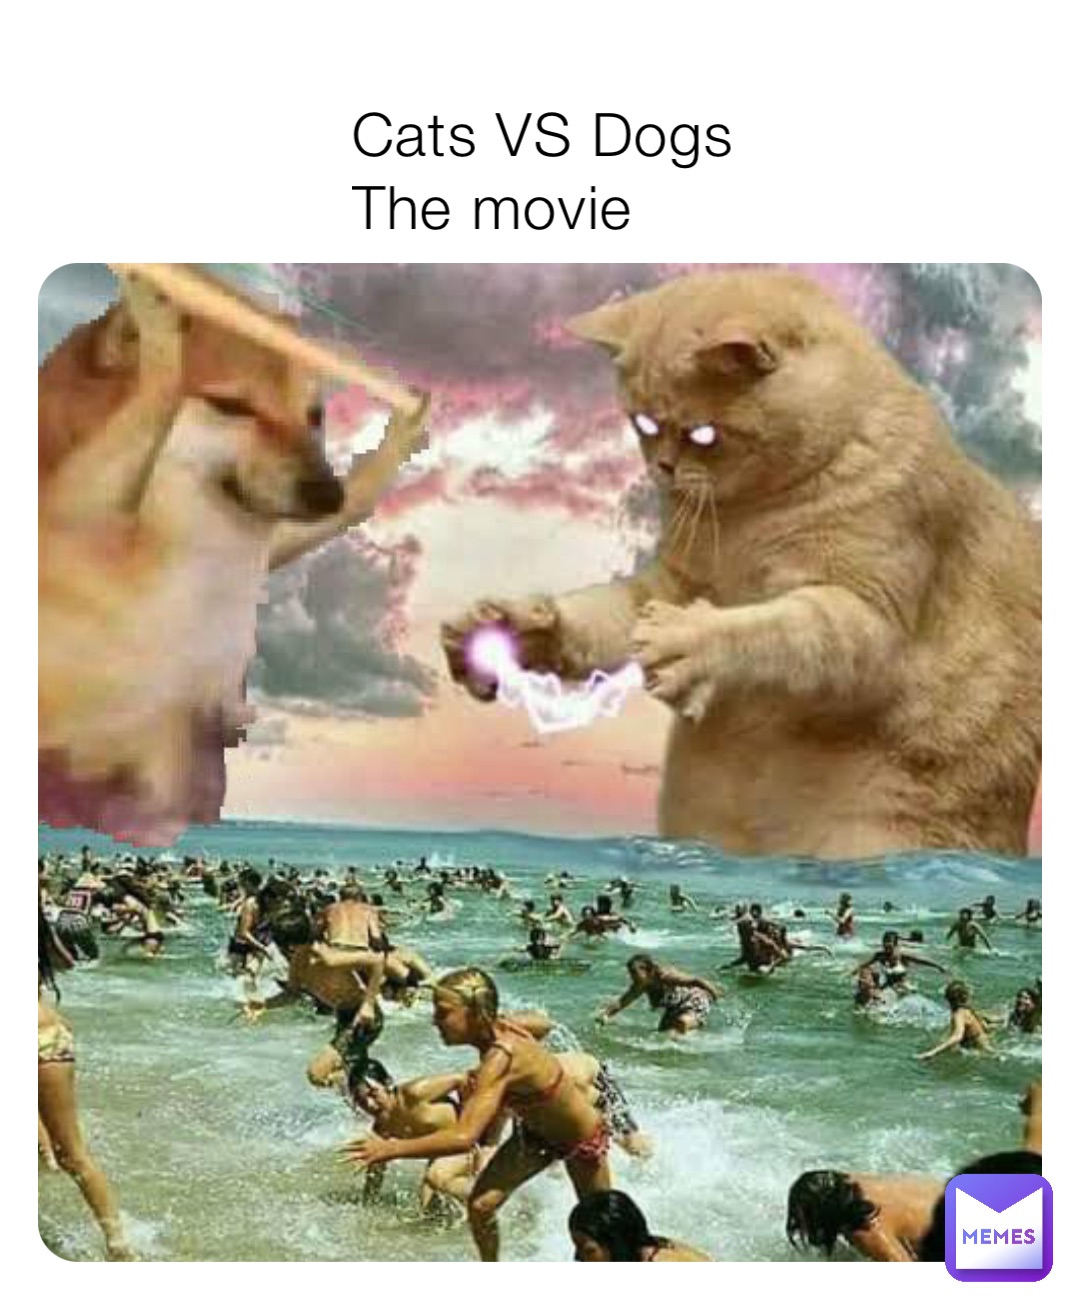 Cats VS Dogs
The movie